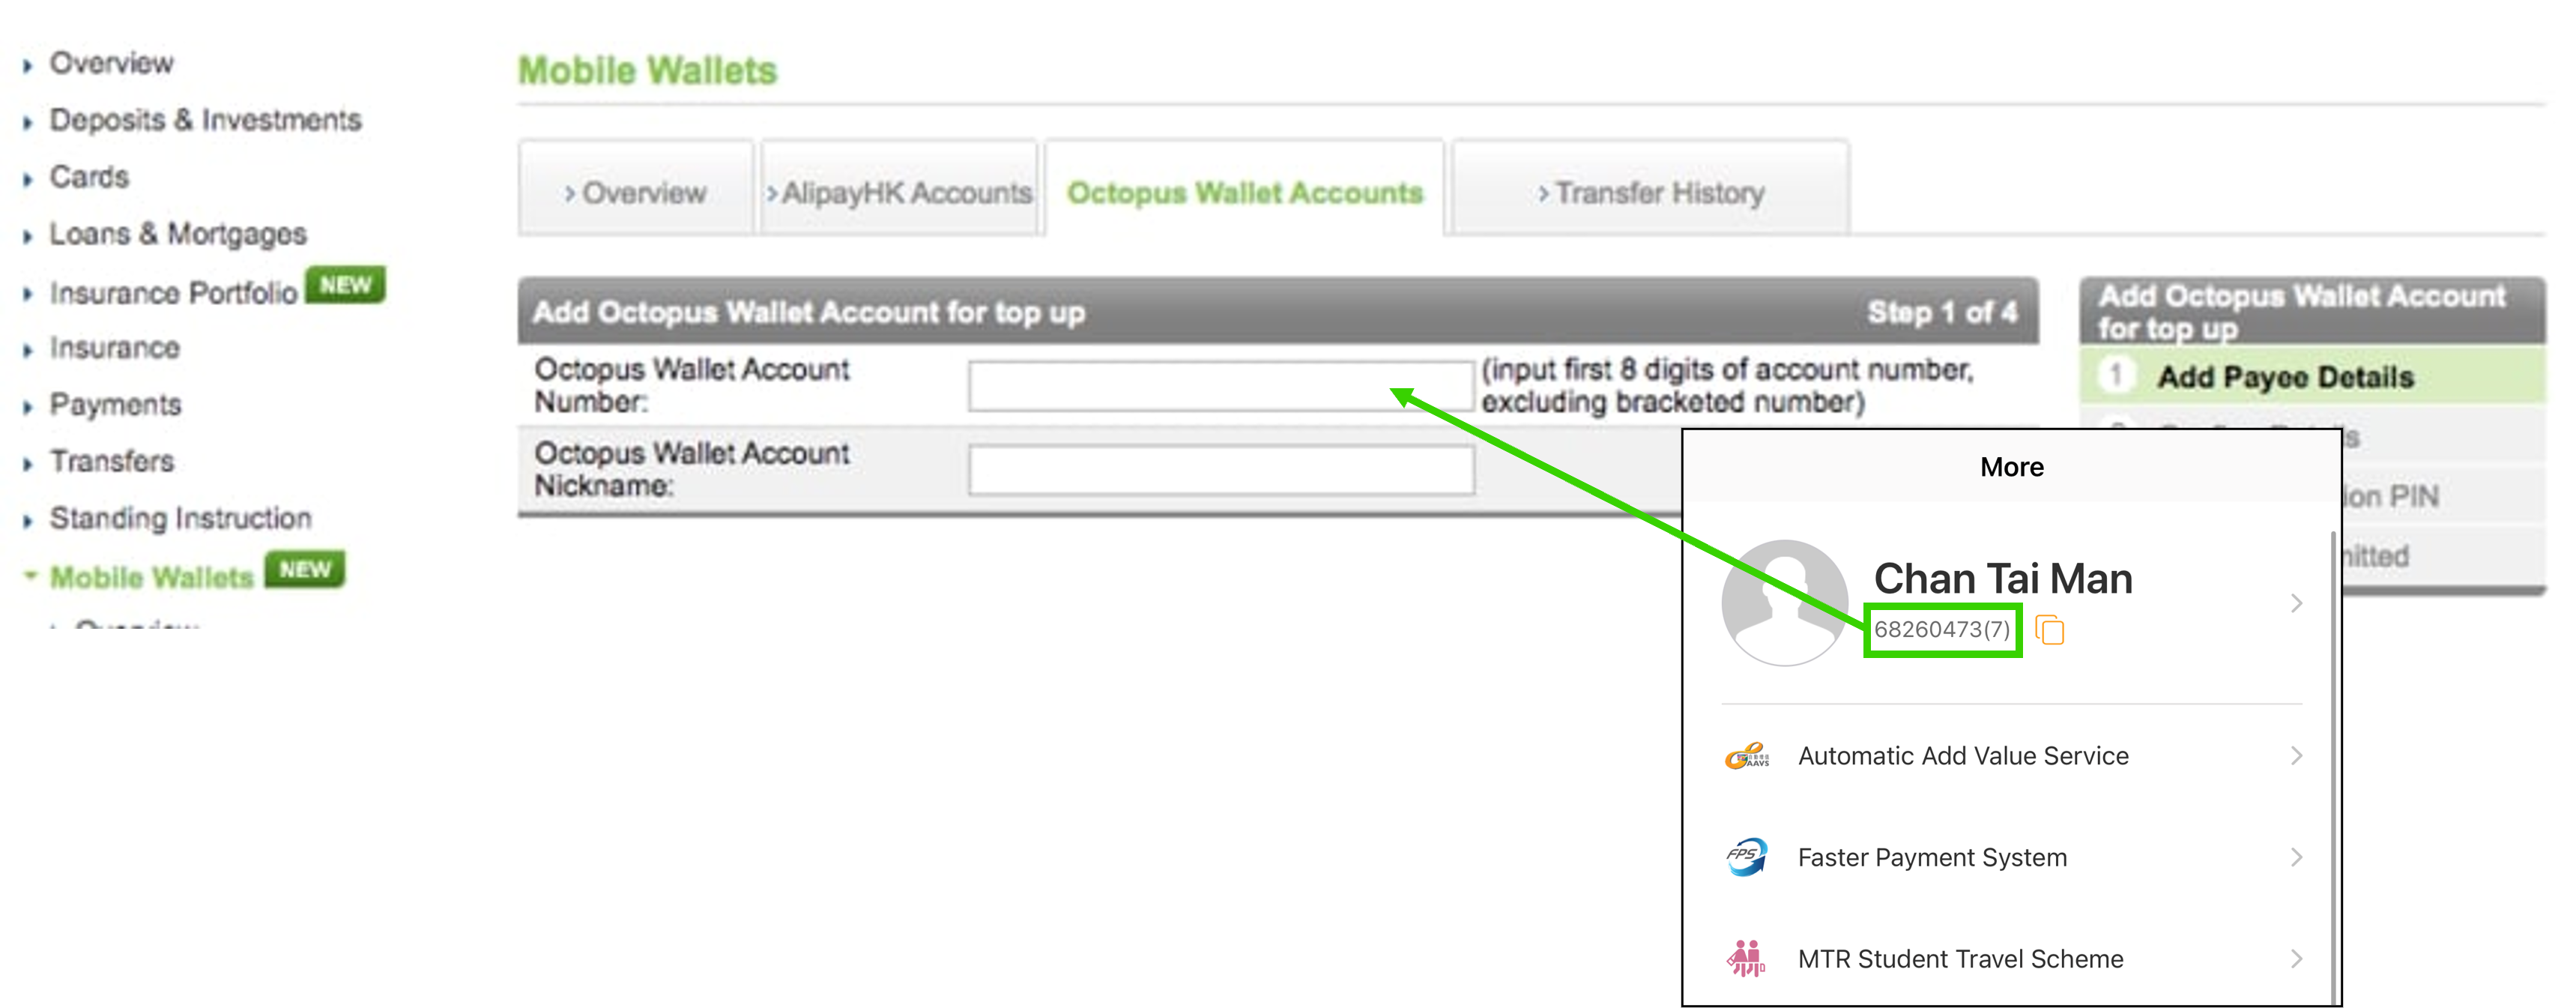 Input first 8 digits of your Octopus Wallet account number (excluding bracketed number) and desired Octopus Wallet account nickname. 